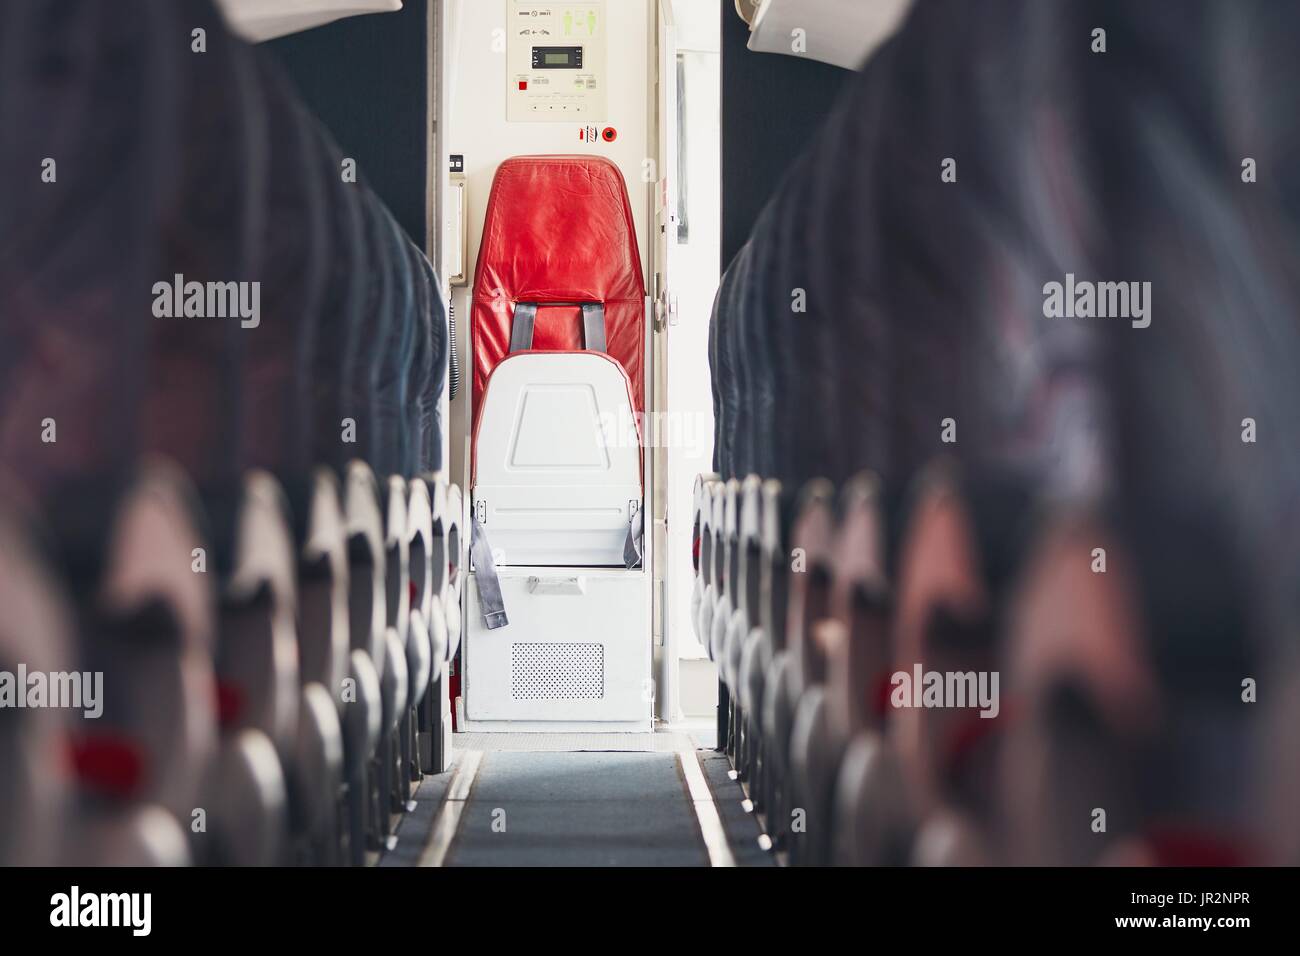 Aisle in economy class and jump seat for cabin crew in the commercial airplane. Stock Photo